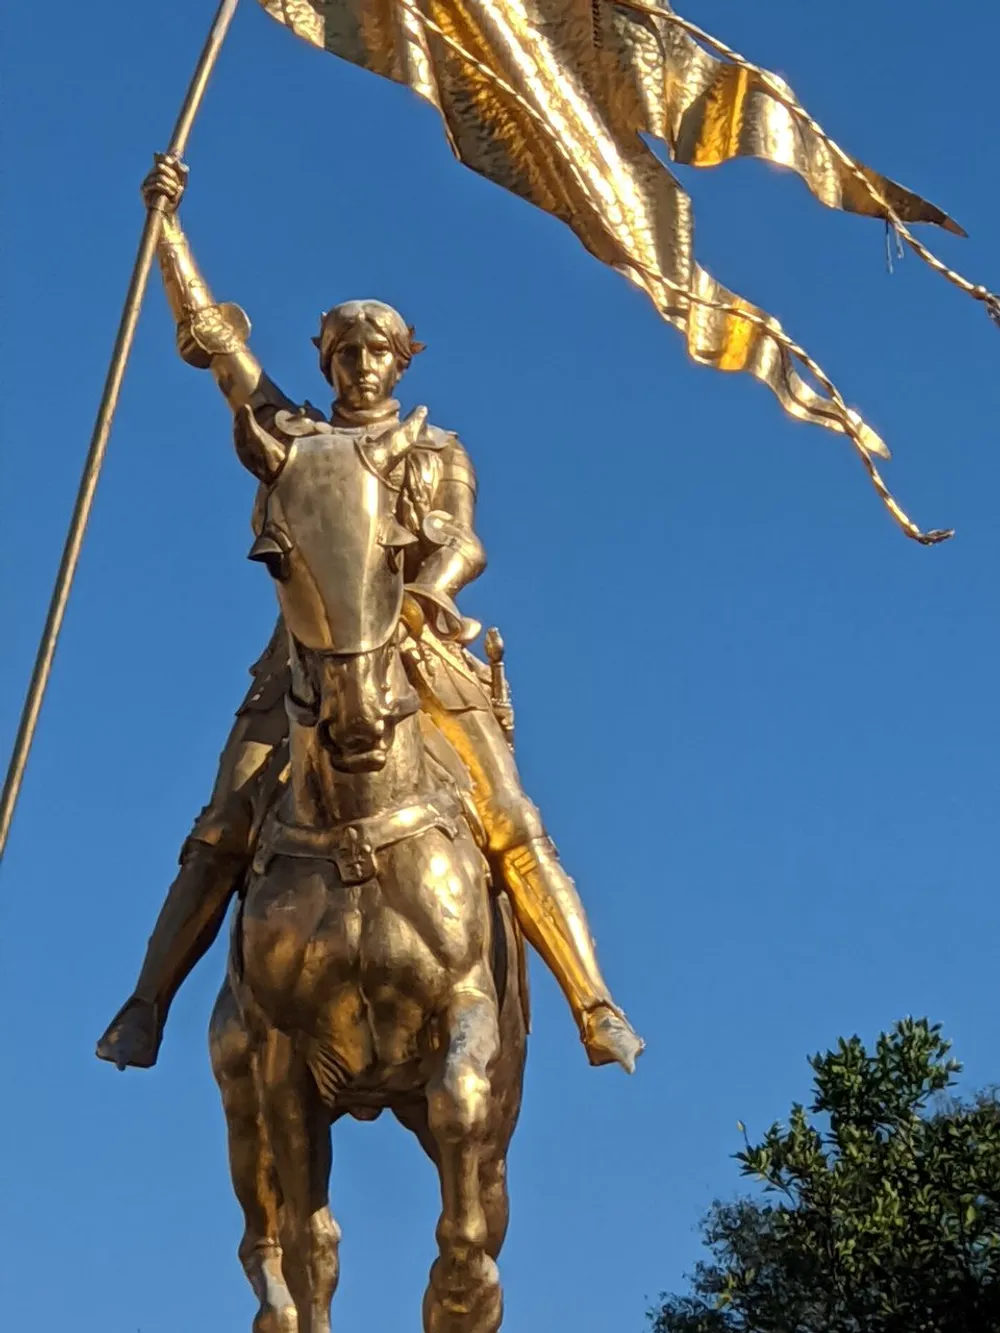 The image shows a golden statue of a mounted figure in armor holding aloft a flag that flutters in the breeze against a clear blue sky